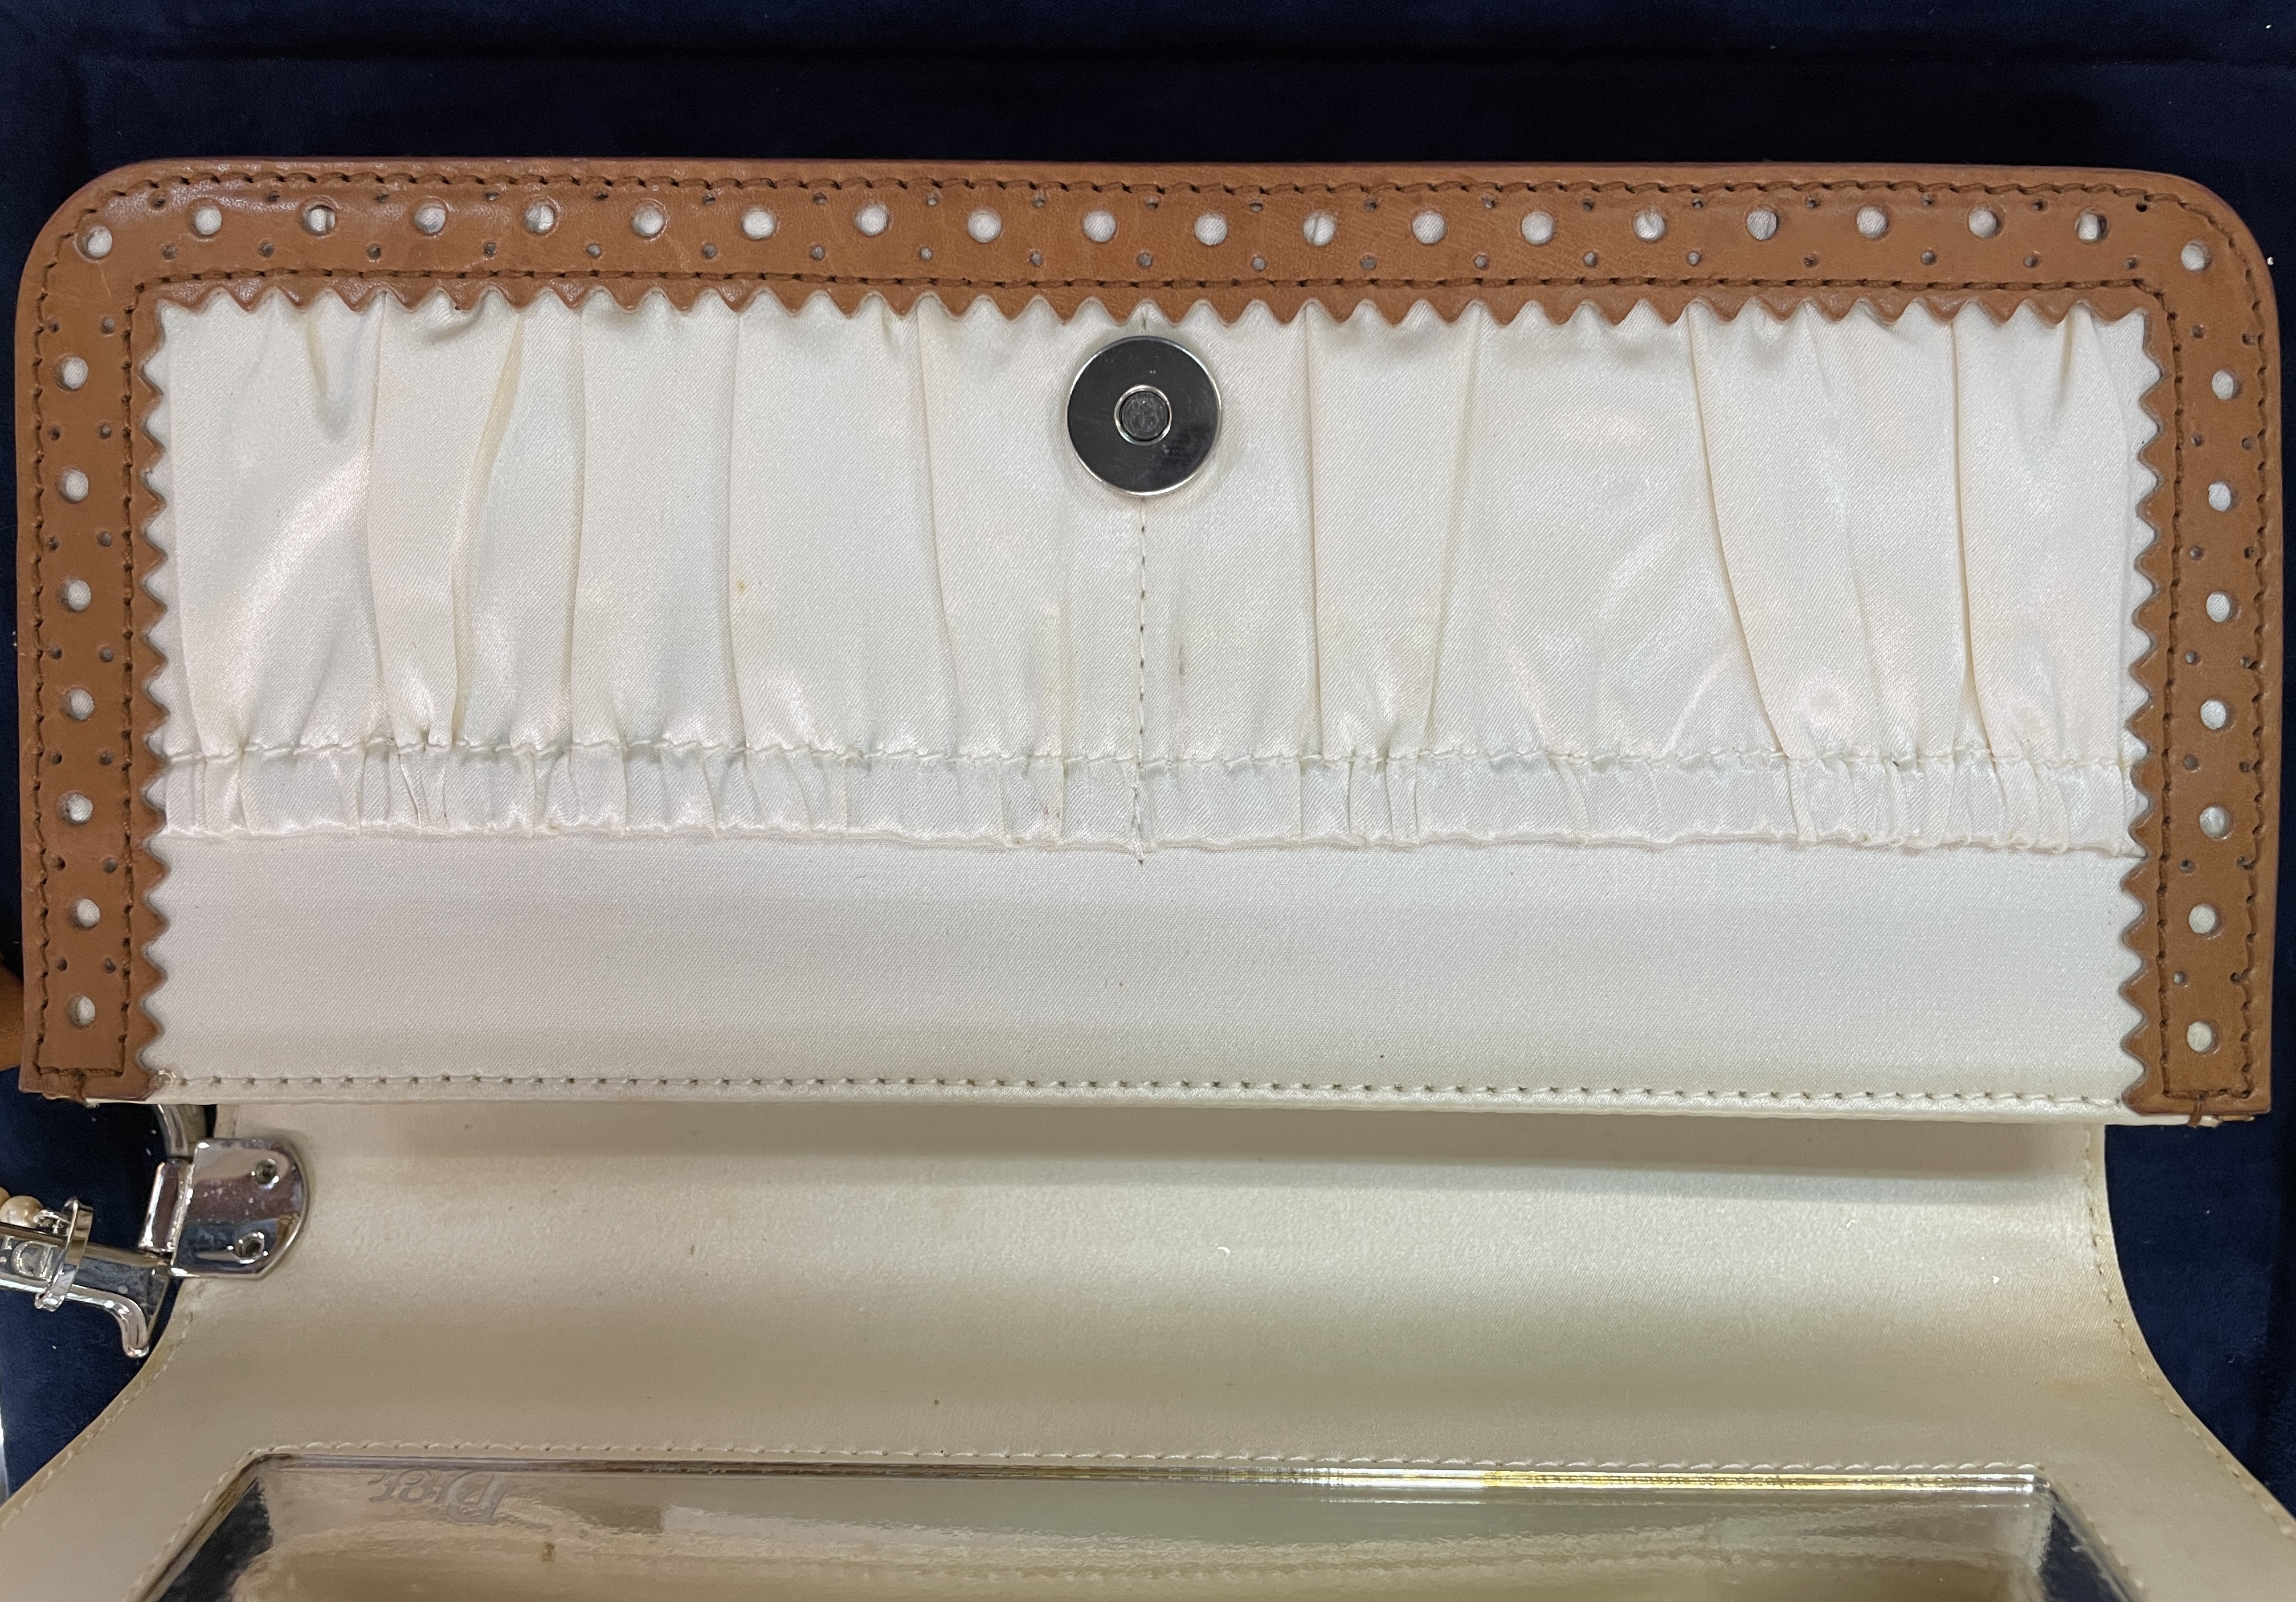 A CHRISTIAN DIOR 'D' TRICK BAG WITH FAUX PEARLS - Image 15 of 22